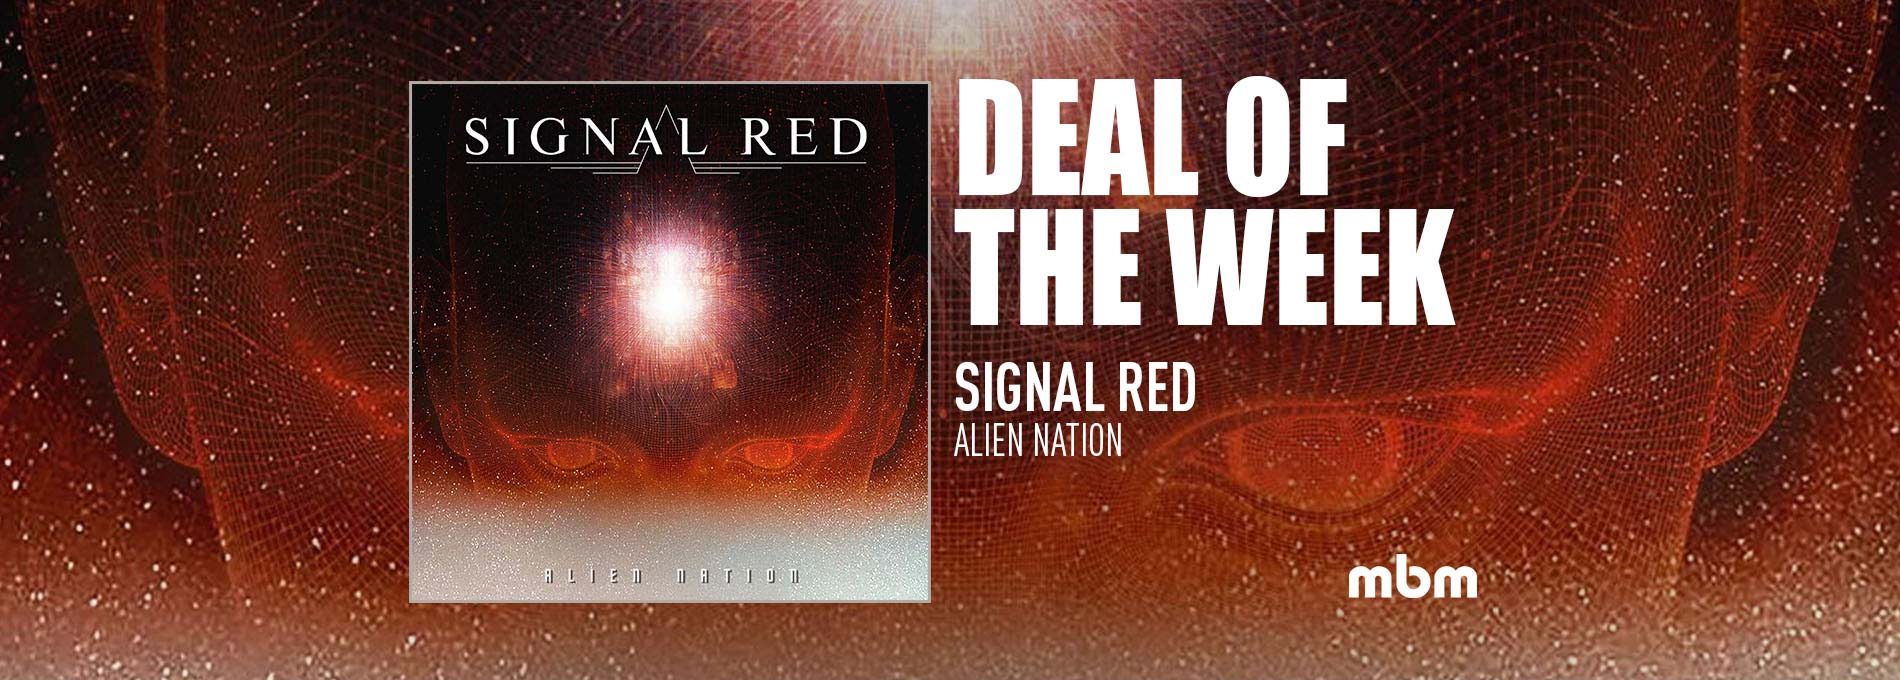 SIGNAL RED - Alien Nation